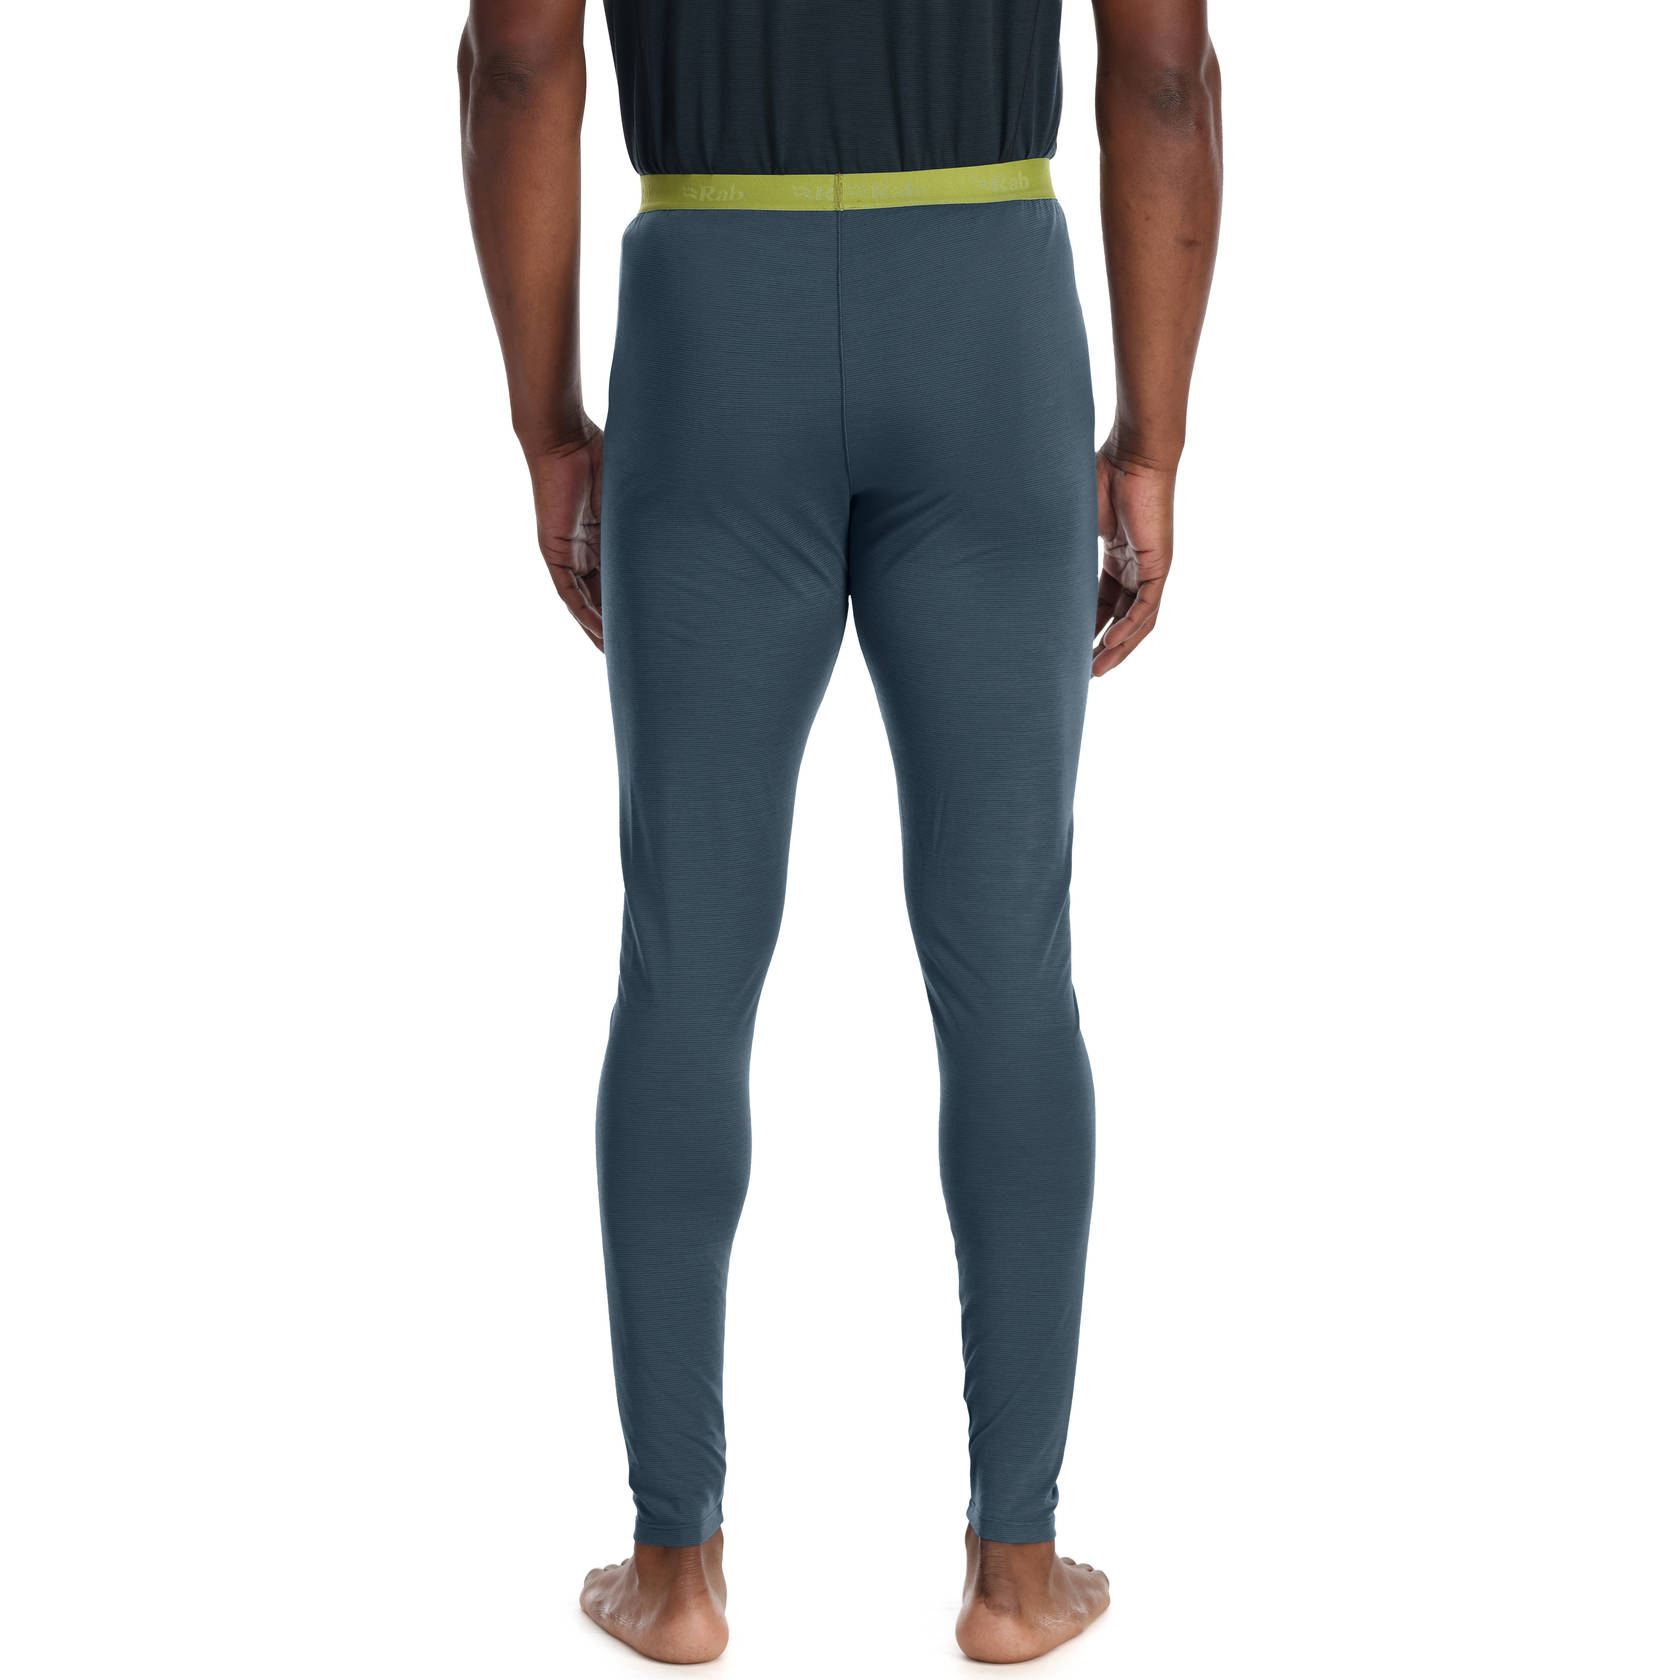 Rab Forge Legging Merino blend Base Layer Underwear Tights with Breadable  Thermal Comfort